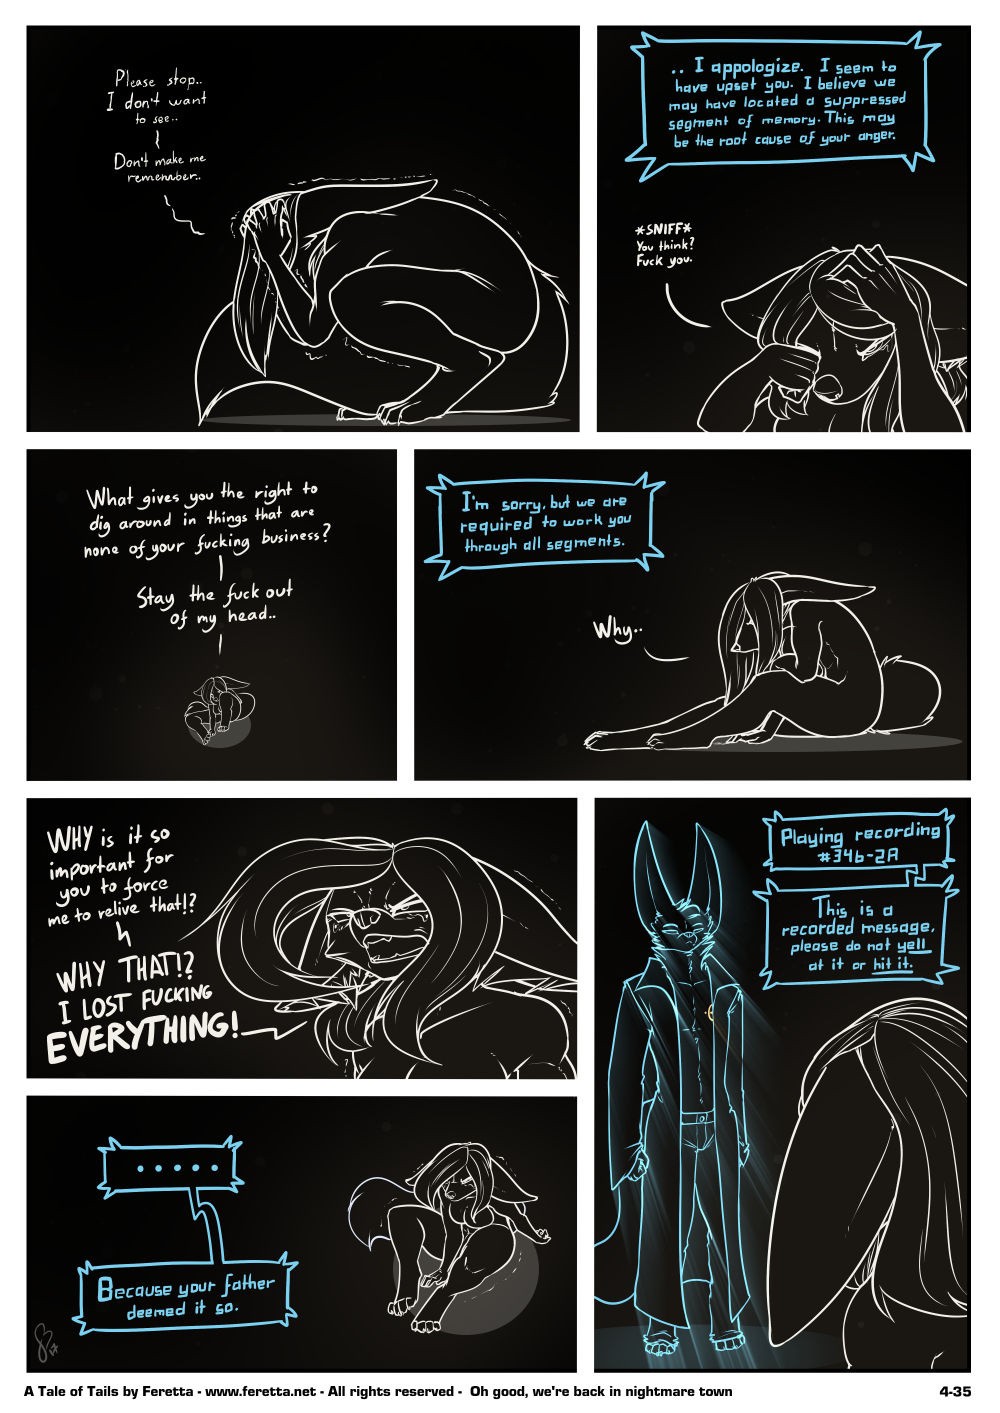 A Tale of Tails 4 - Matters of the mind porn comic picture 35